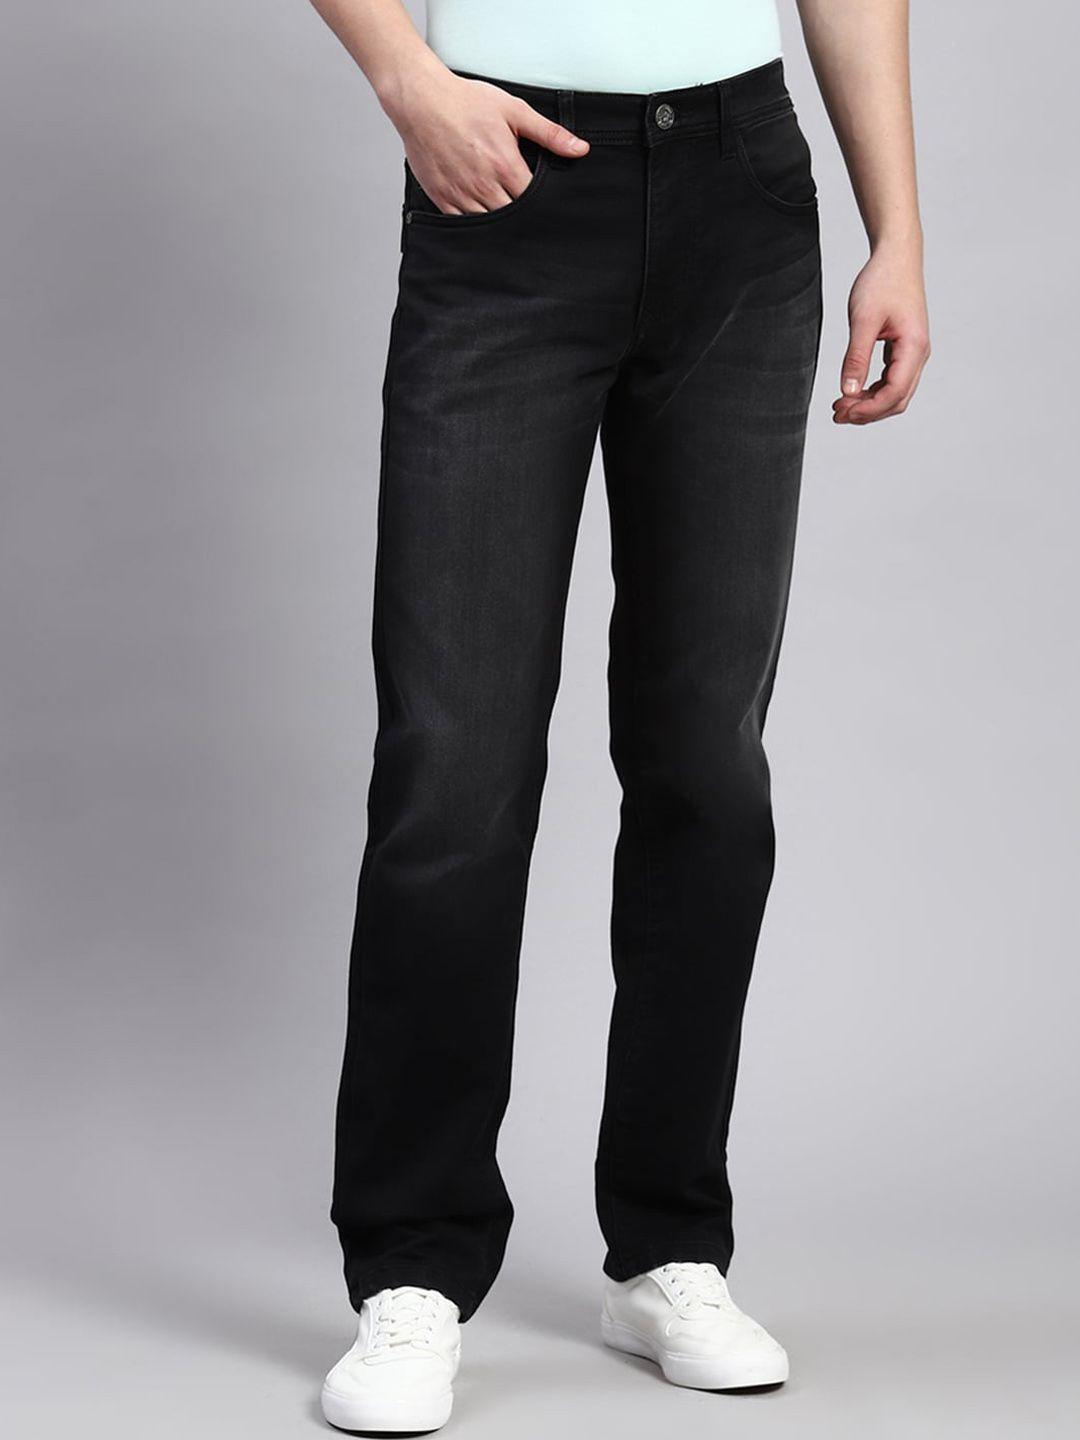 monte-carlo-men-straight-fit-light-fade-clean-look-jeans